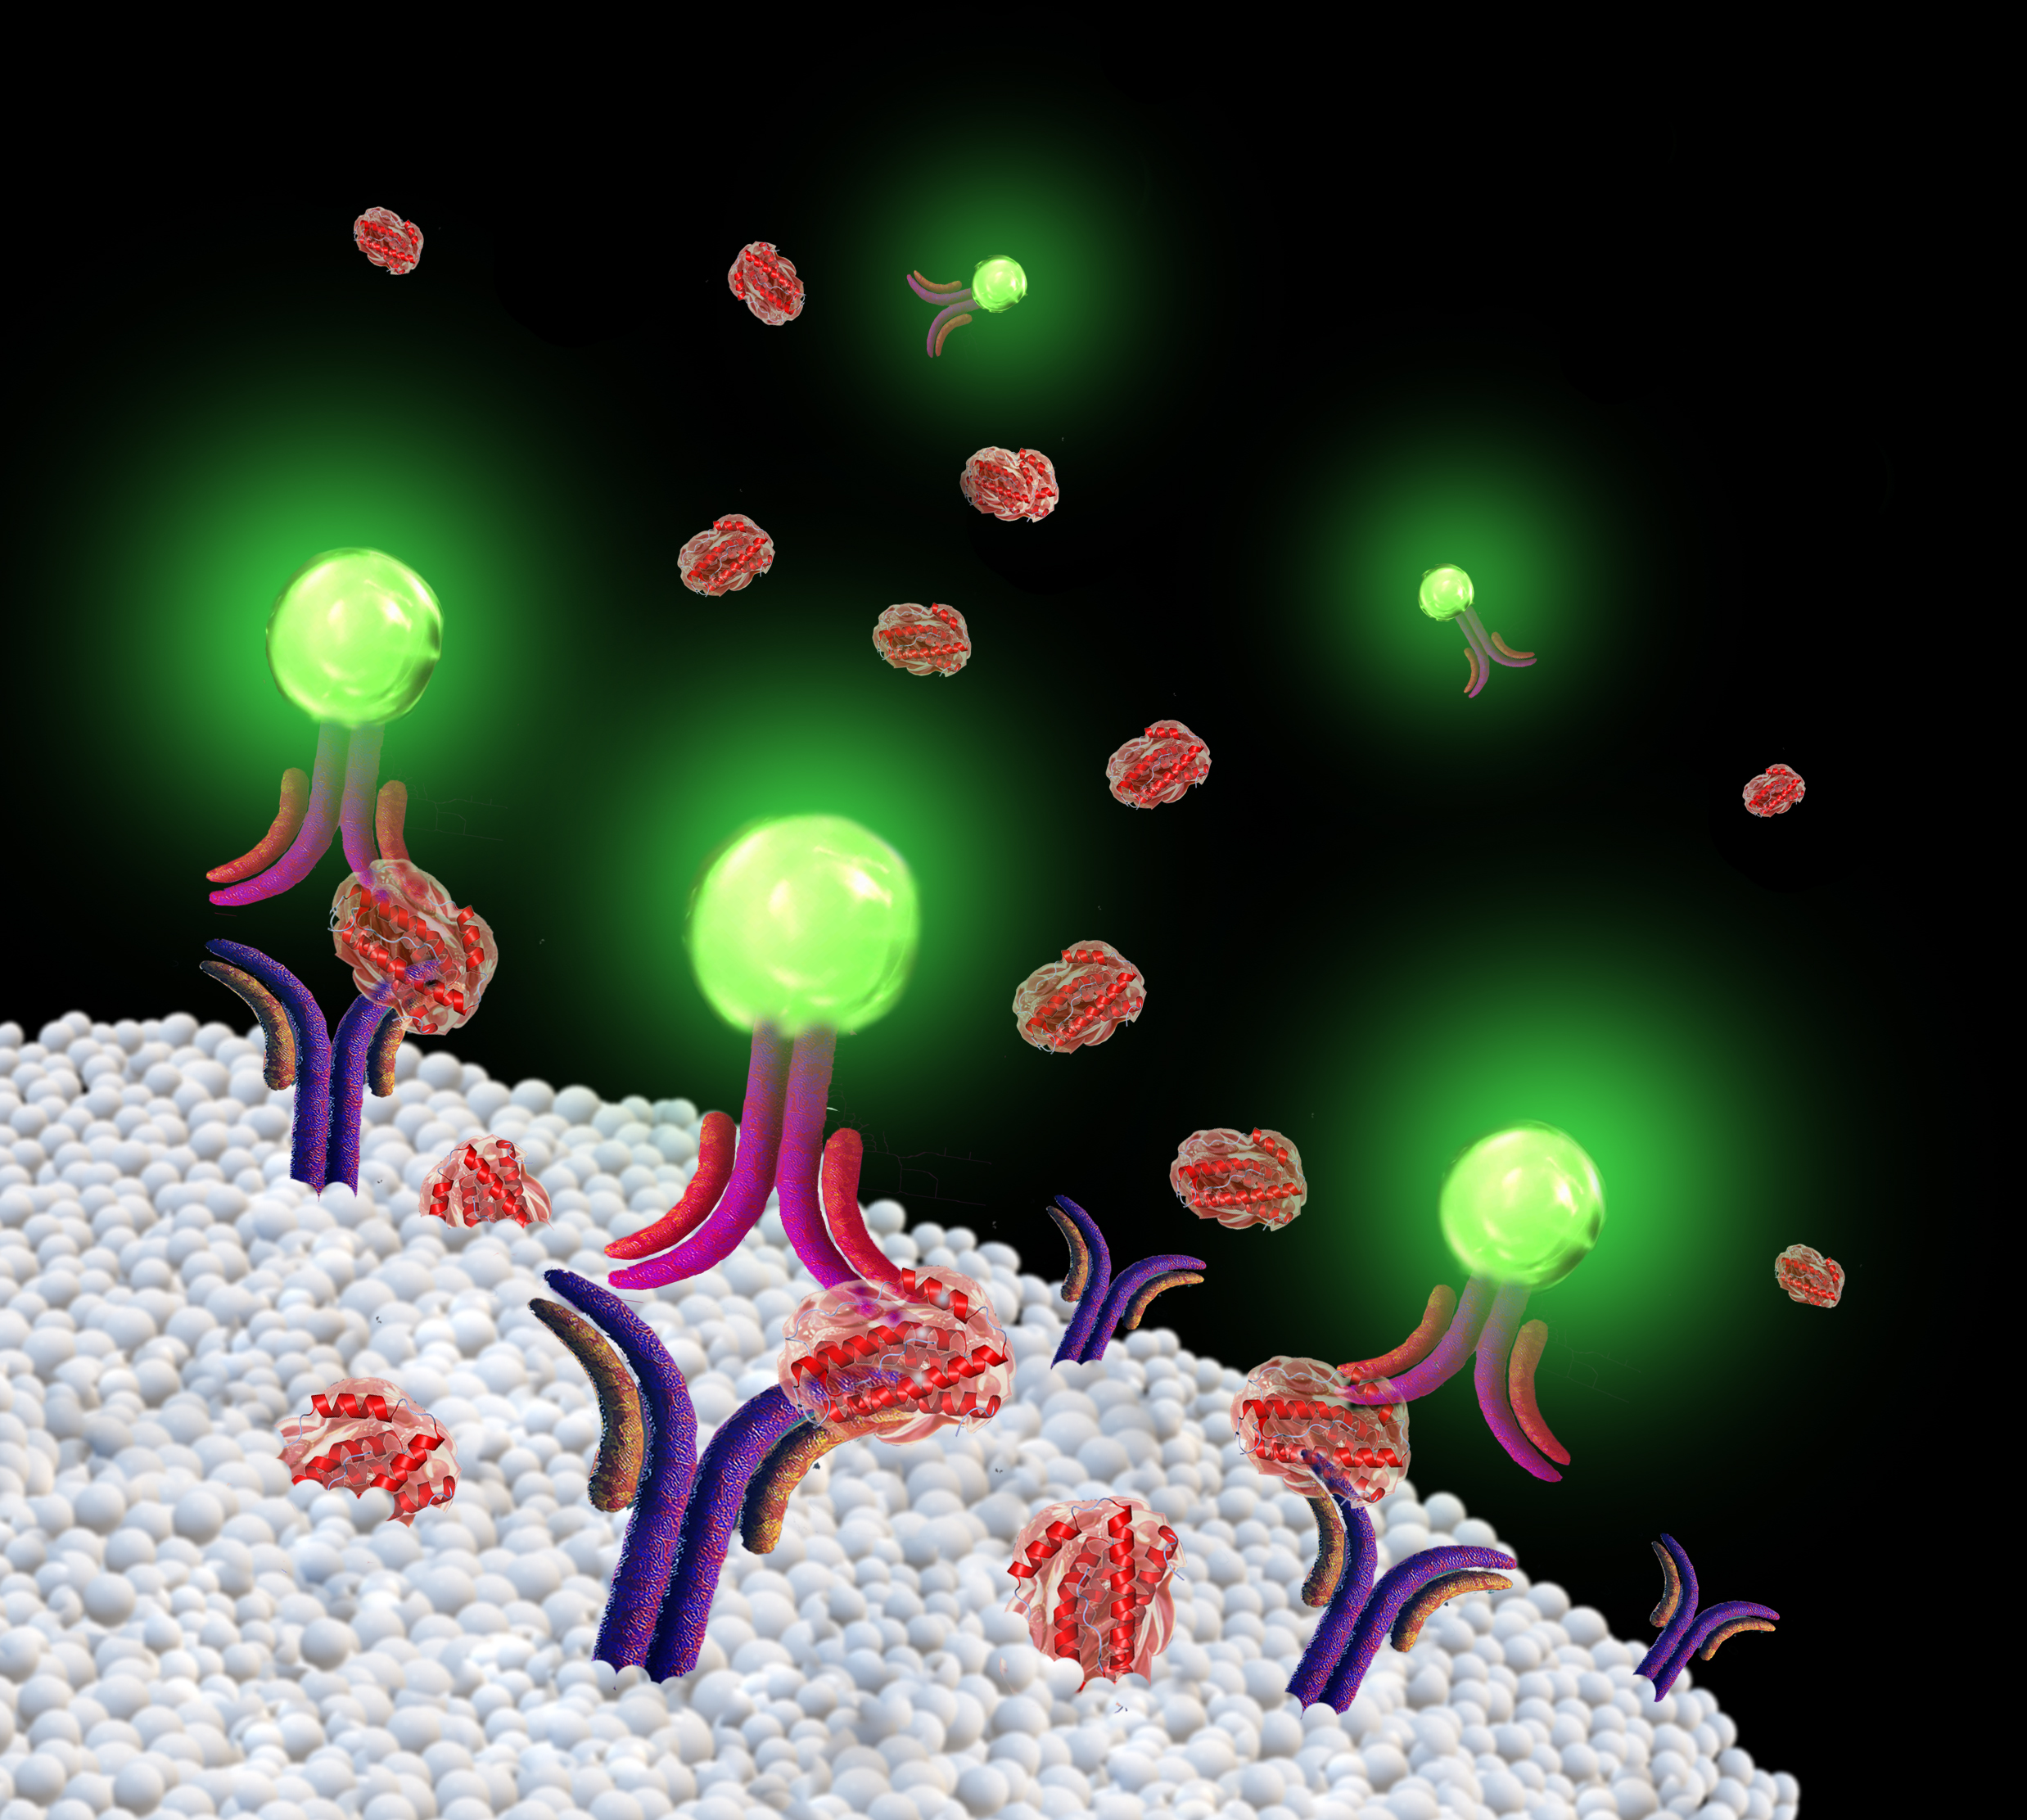 The image represents our sensor during the process of detecting cytokine molecules being secreted from cells. Detection is a specific step in our chemical procedure. The sensor is represented by a pair of Y-shaped antibodies, the capture antibody (purple stem) and the detection antibody (pink stem); they both target the same cytokine molecule (transparent pink blob with spirals) but different epitopes. The fluorescent bead on the detection antibody is represented by a green light emitting ball. The capture antibodies are anchored in the cellular membrane represented by a layer of partially ordered white balls rendering lipid molecules. Cytokine molecules continue to be secreted from the cellular membrane and some proportion becomes captured by the sensor, while many escape from the cell. Not all capture antibodies have been able to capture the cytokines. The distant green balls with attached antibodies (pink stems) represent the nanoparticles which are yet to detect the captured cytokines.